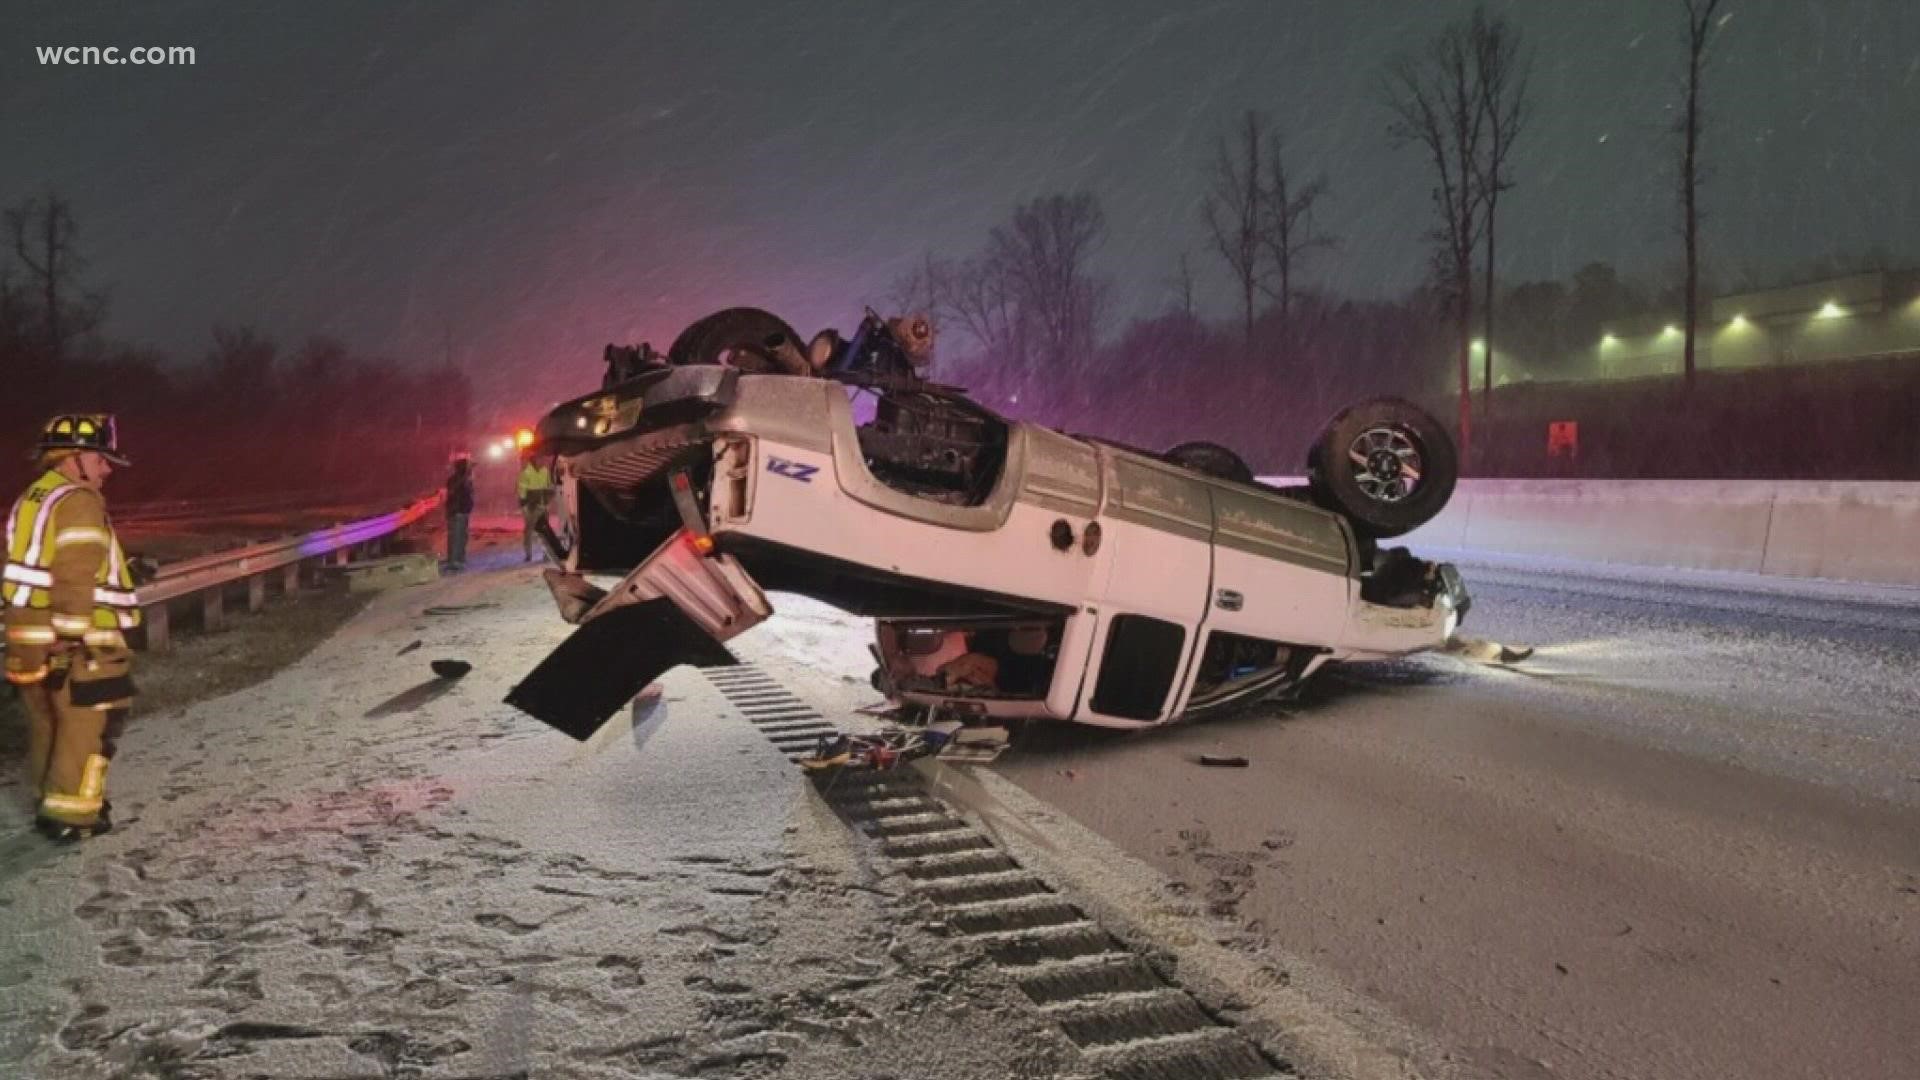 Mooresville firefighters said a truck overturned on an icy I-77 early Sunday as the winter storm moved into the Carolinas.